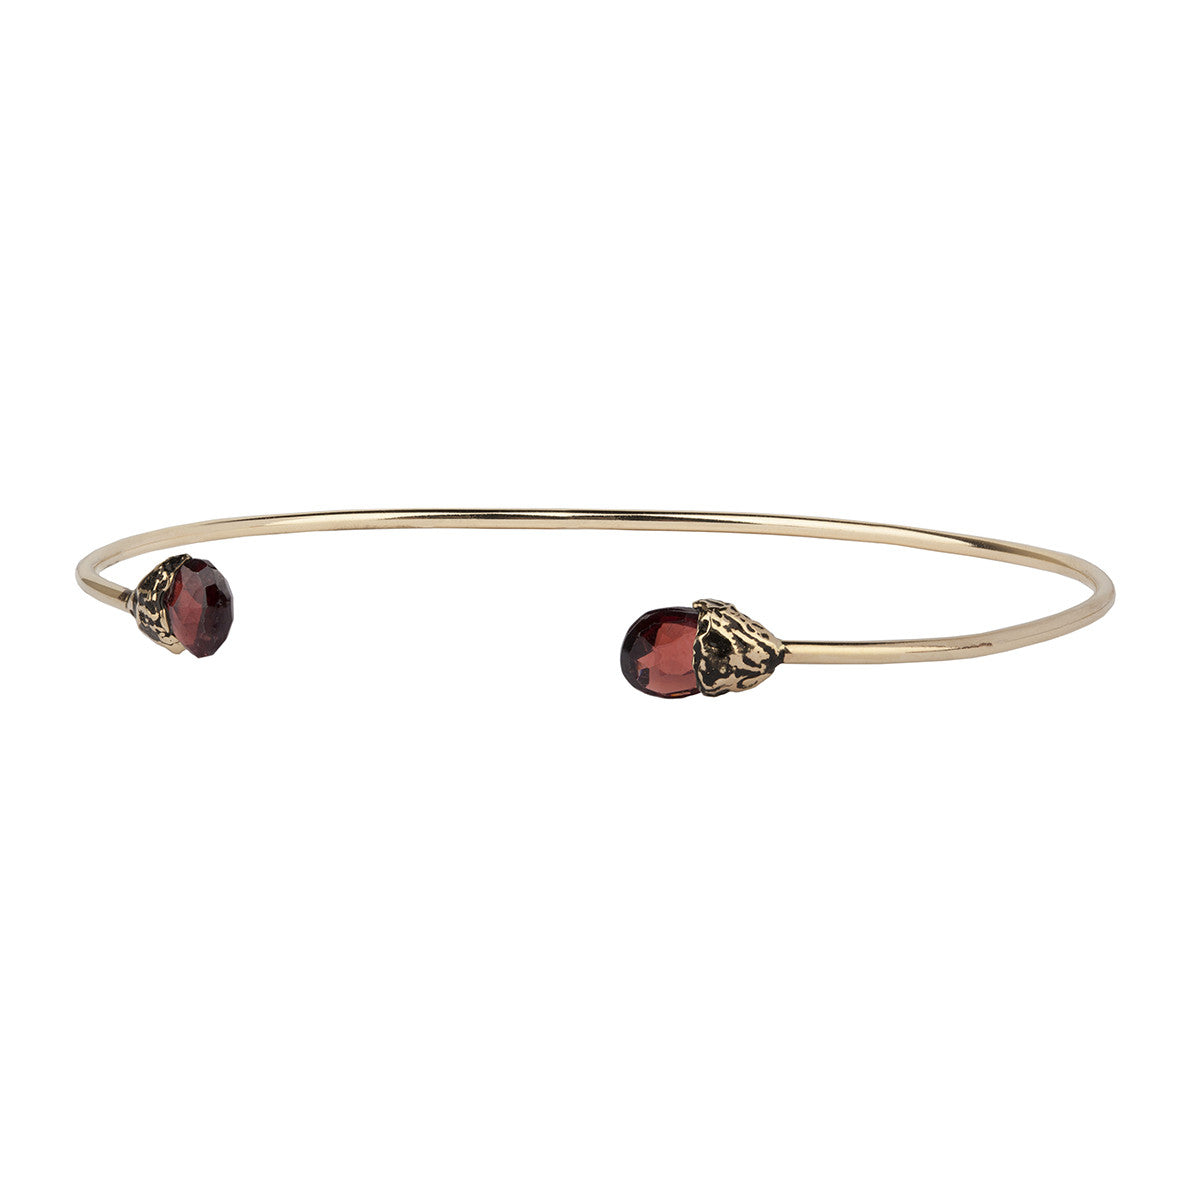 A 14k gold bangle made to hold charms capped with a semi precious stone representing clarity.